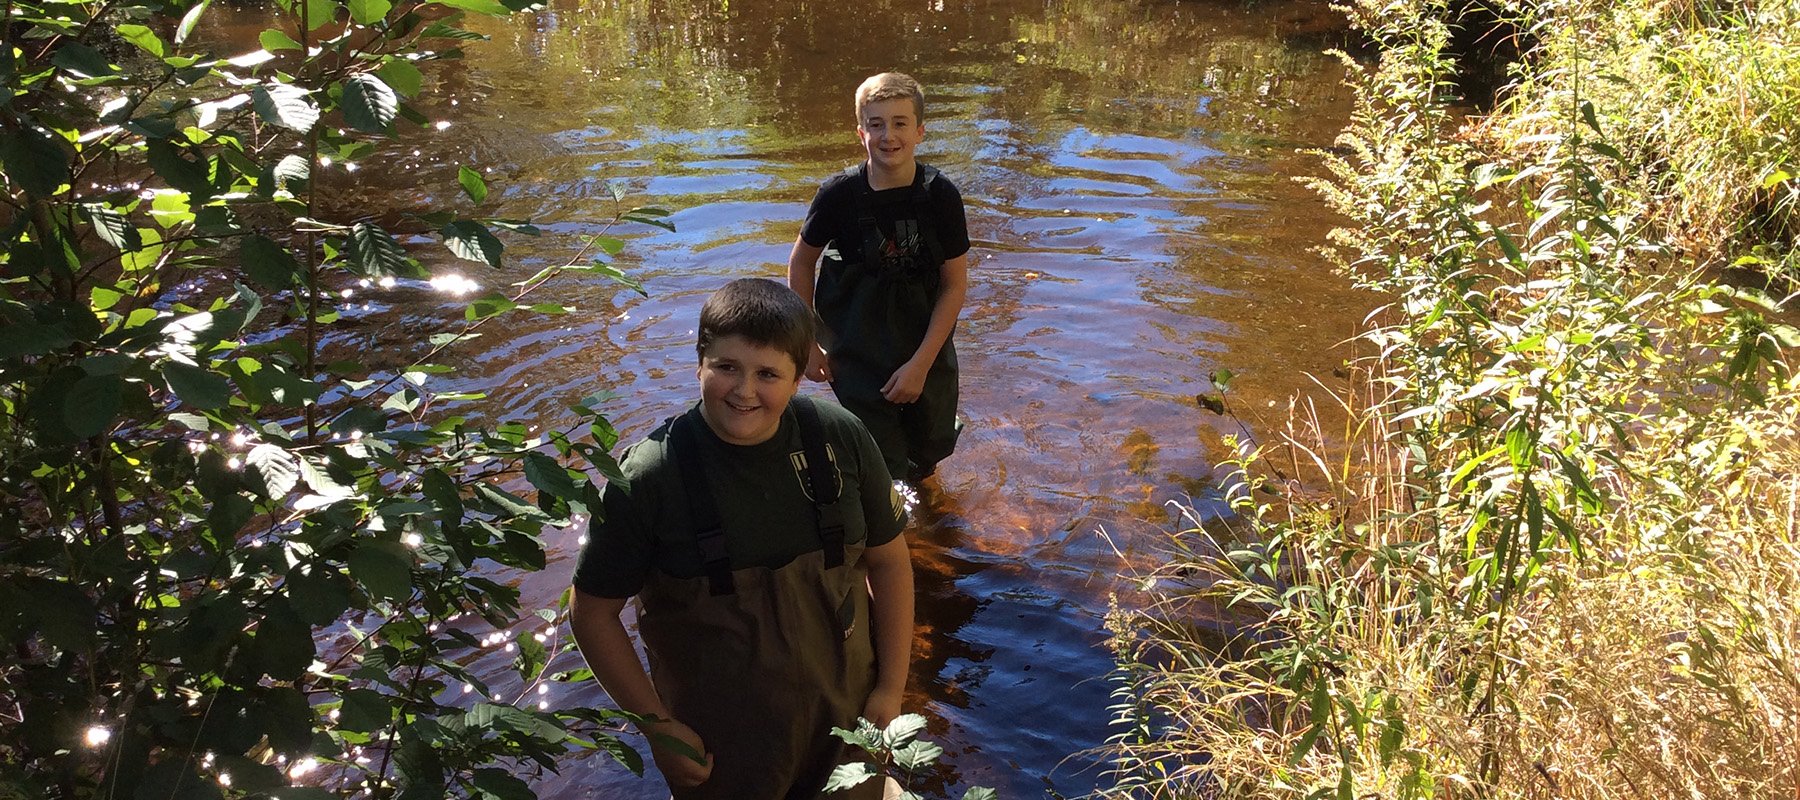 PRMS - Boys outdoor learning and fishing